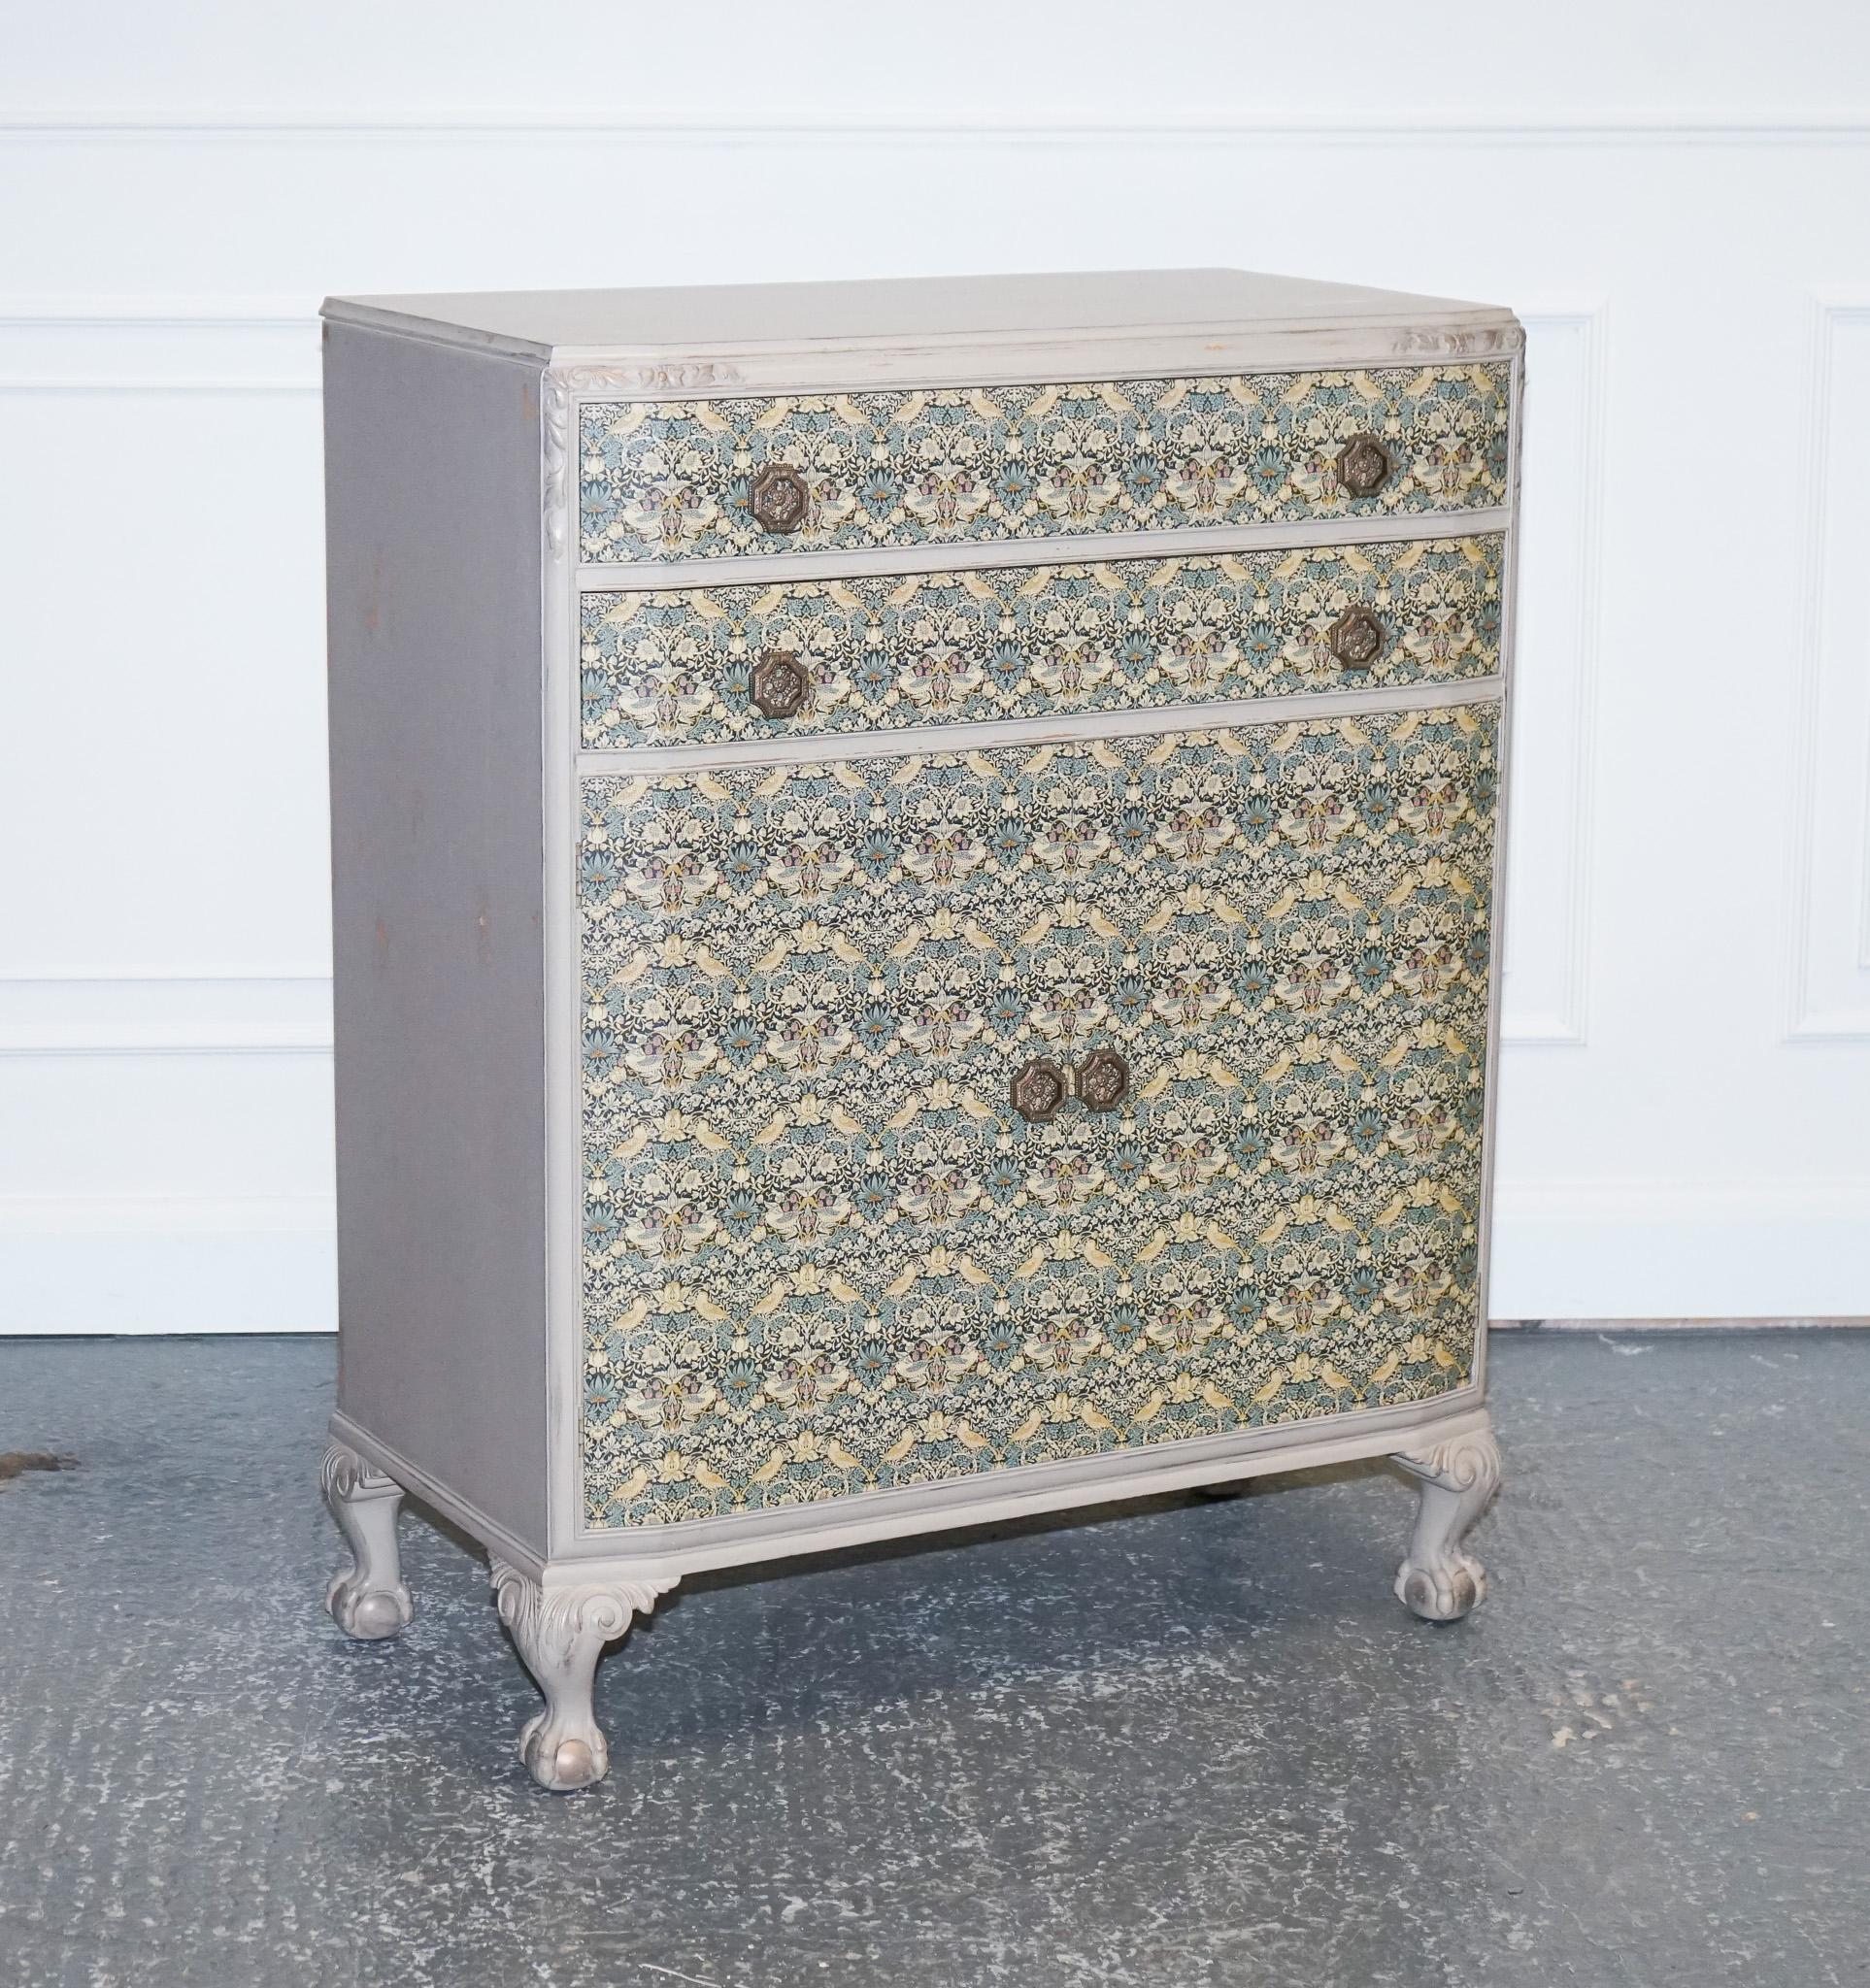 We are delighted to offer for sale this Antique Waring & Gillow Hand painted Chest of Drawers.

This chest of drawers is a stunning piece of furniture, with a rustic and unique design that makes it stand out in any room.

The chest has two